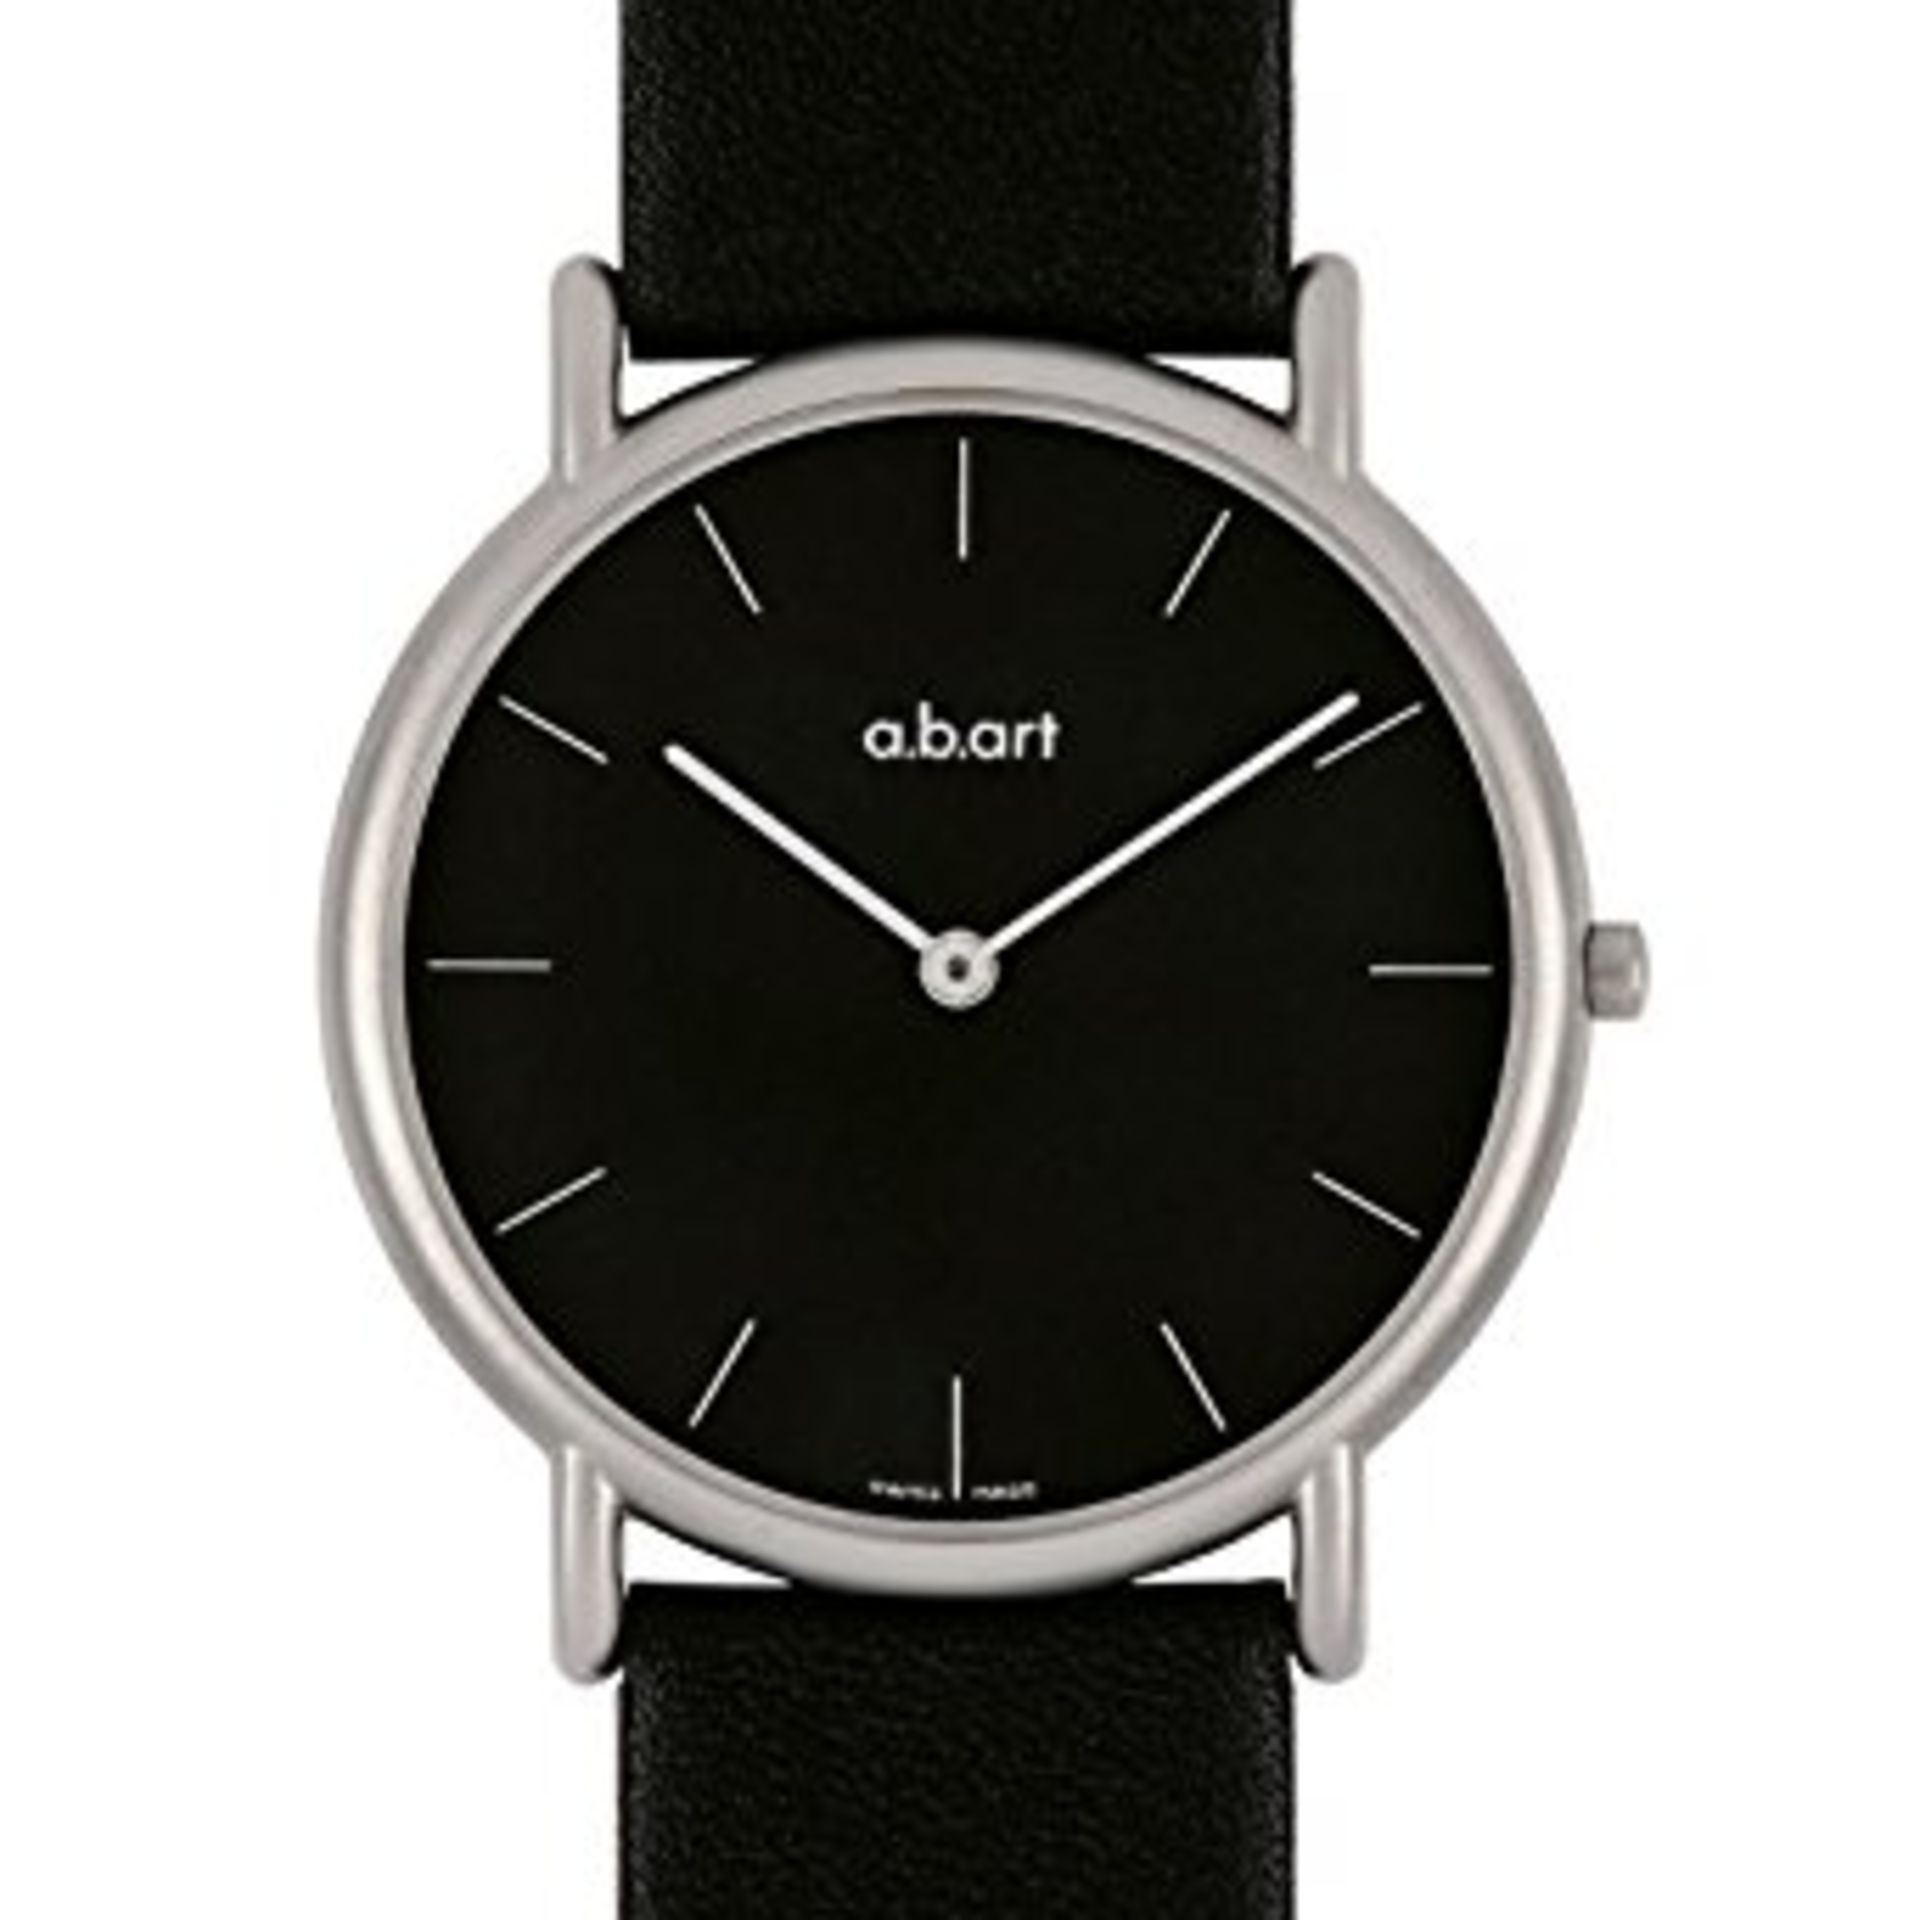 a.b.art Men's Quartz Watch with Black Dial Analogue Display - Free Delivery - Manufacturers Warranty